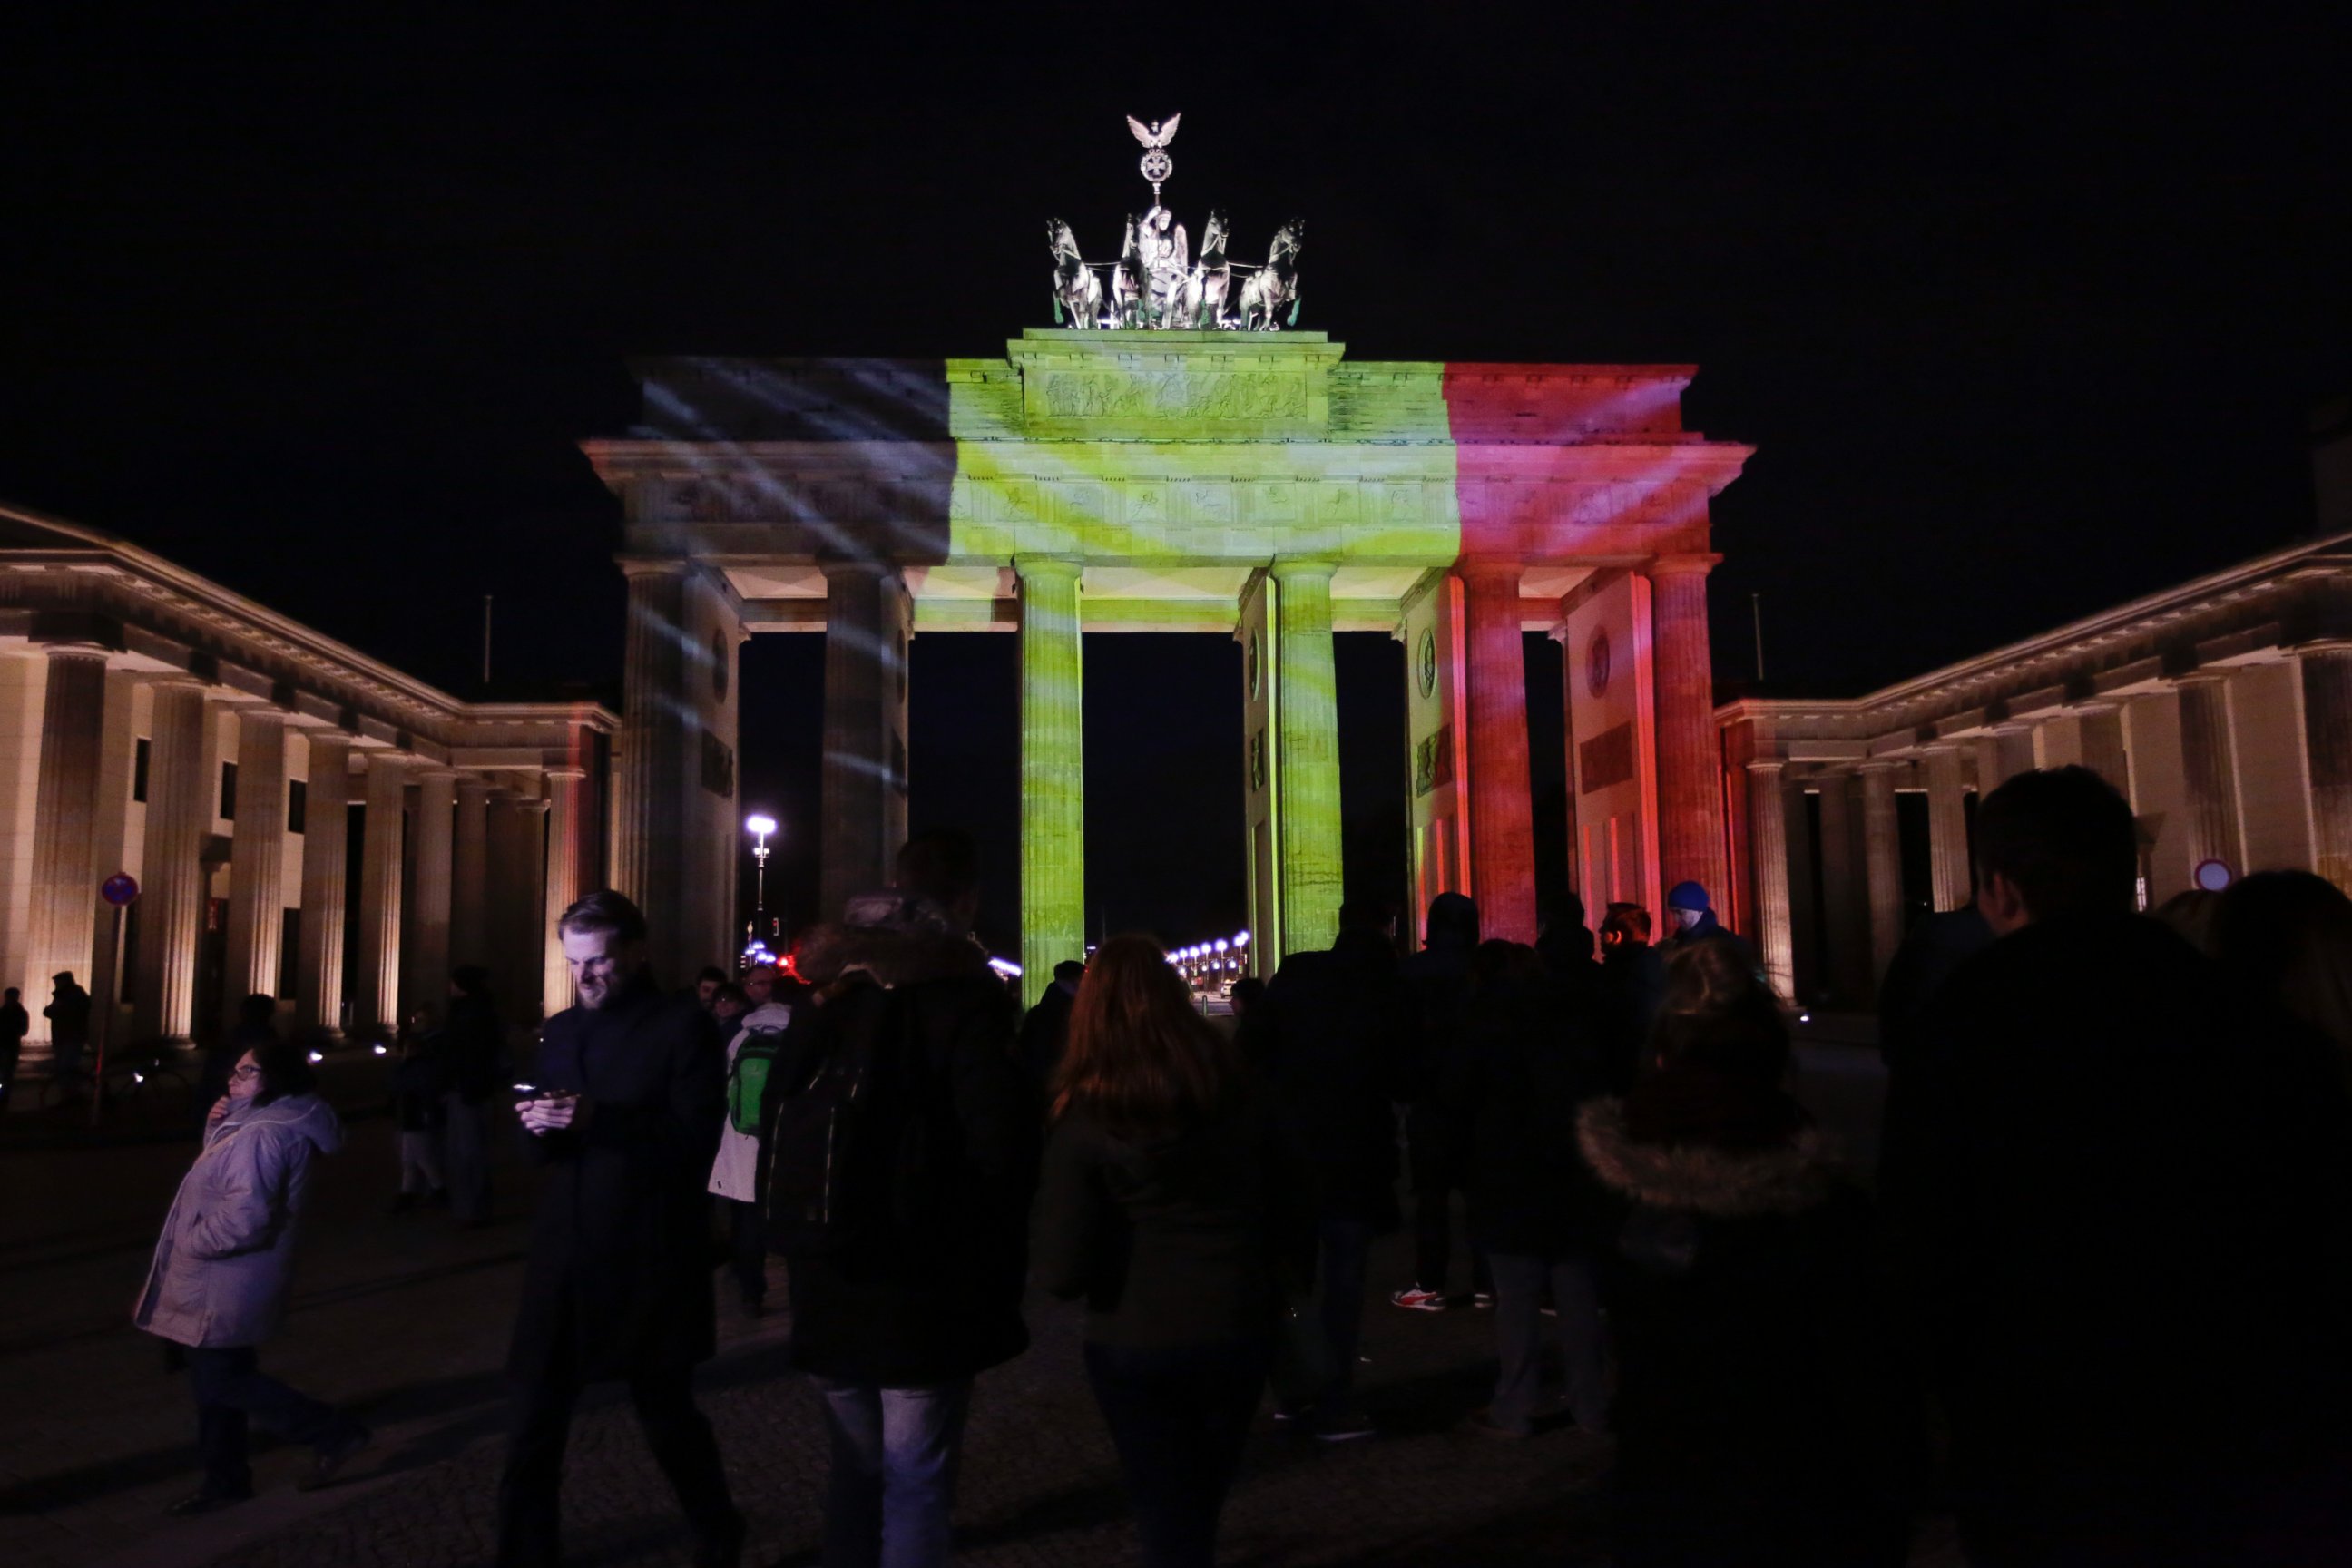 PHOTO: The Brandenburg Gate is illuminated with the Belgium national flag in reaction to the Brussels attacks, in Berlin, Germany, March 22, 2016.